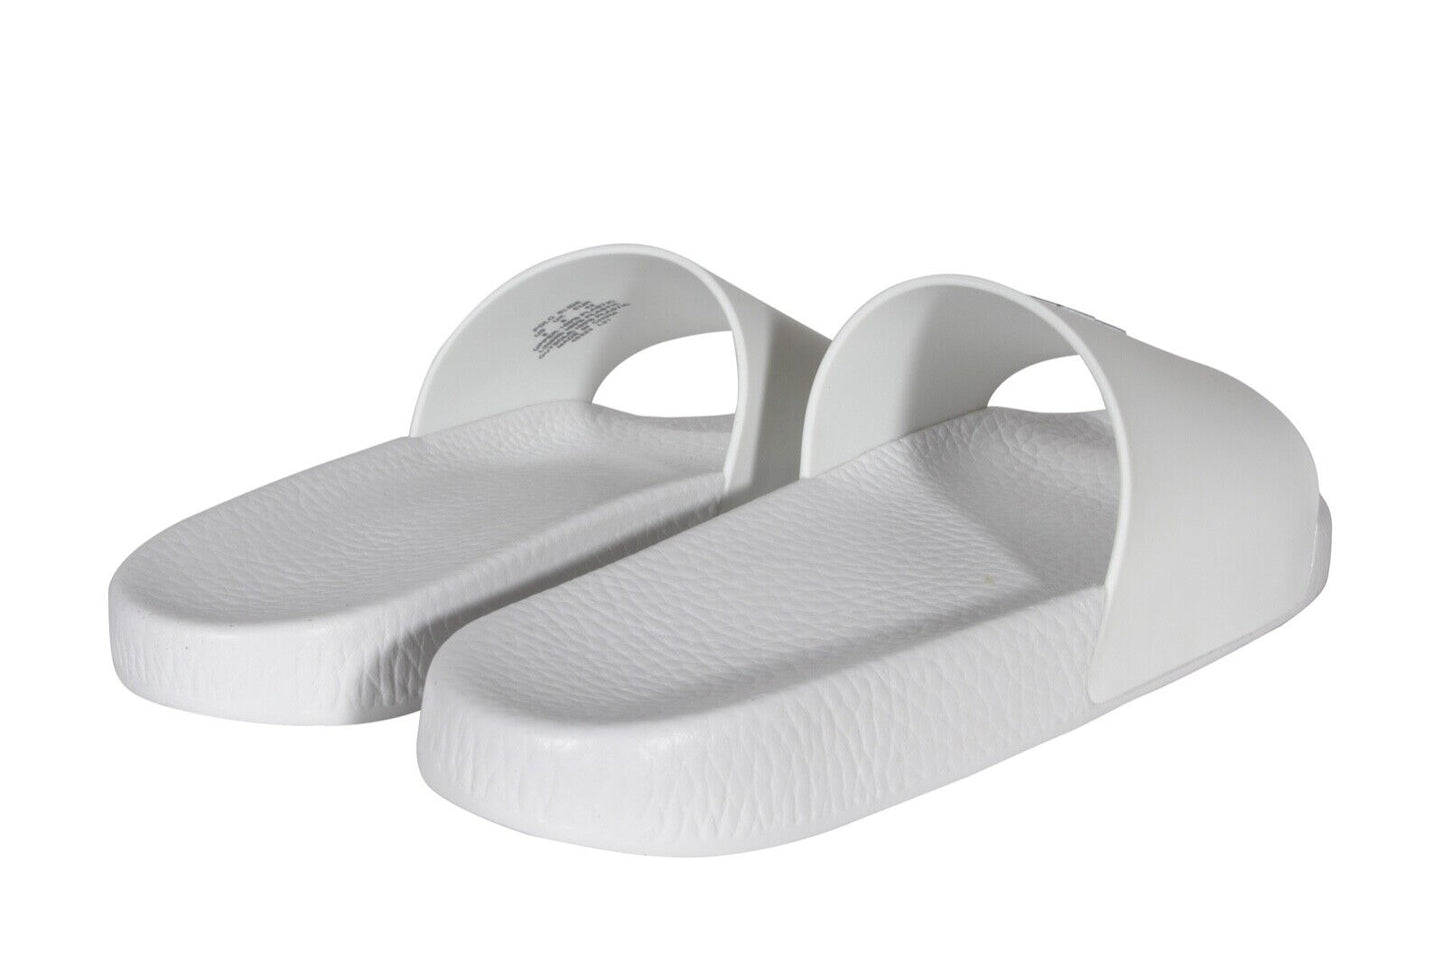 Polo Ralph Lauren Signature Pony Slide in White and Navy Blue 809852071001